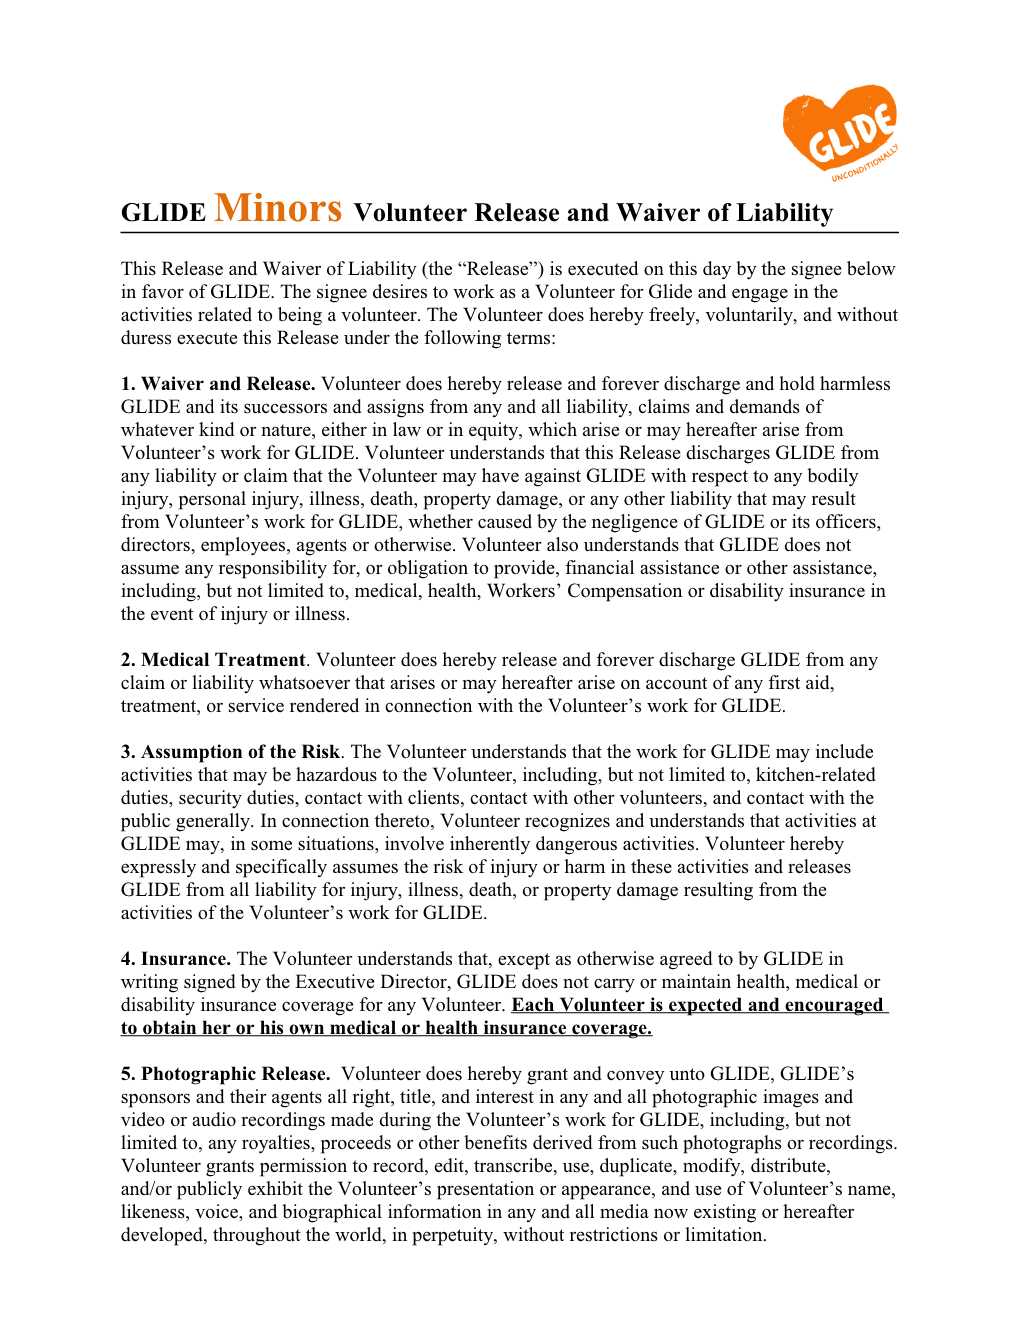 GLIDE Minorsvolunteer Release and Waiver of Liability